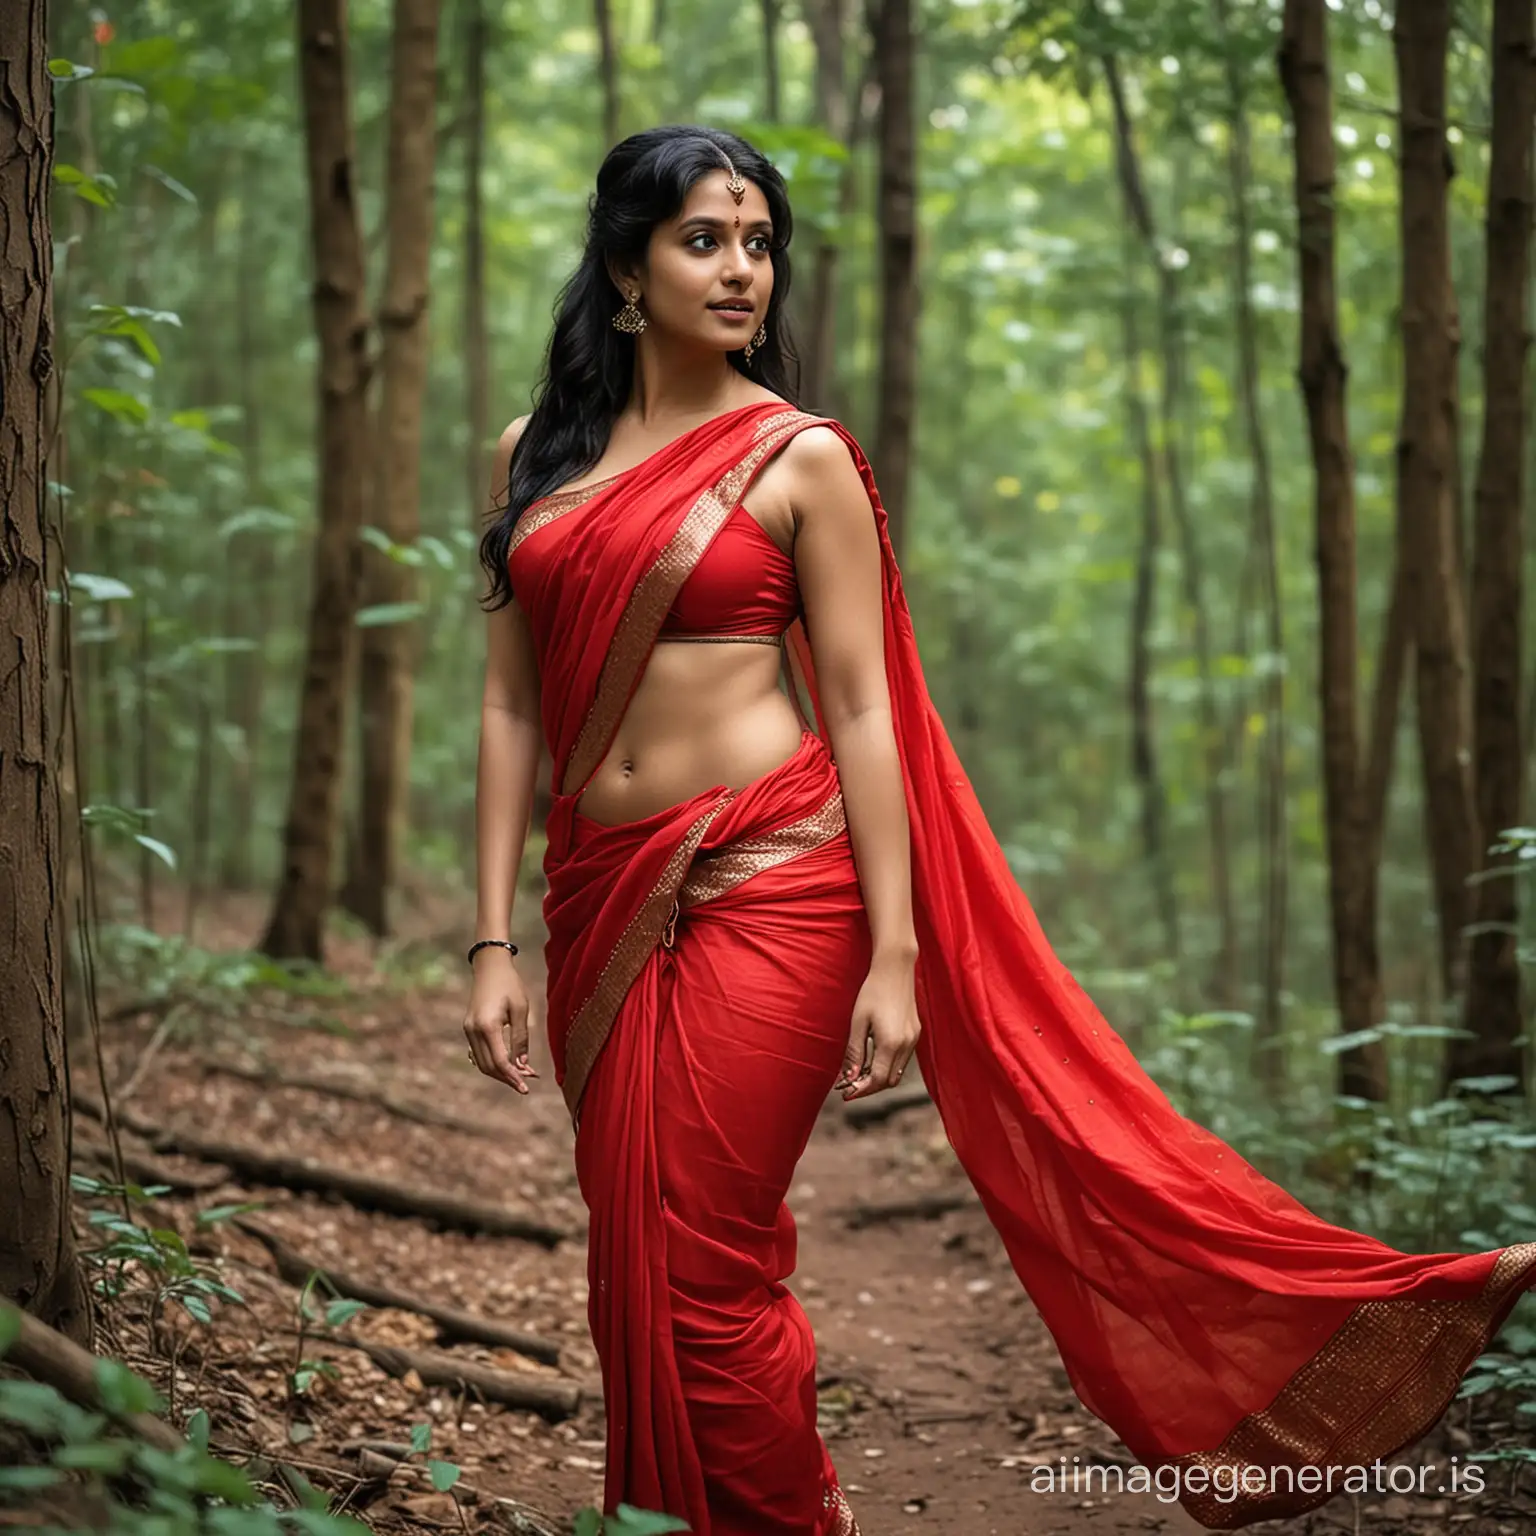 Erotic Women in red saree in forest